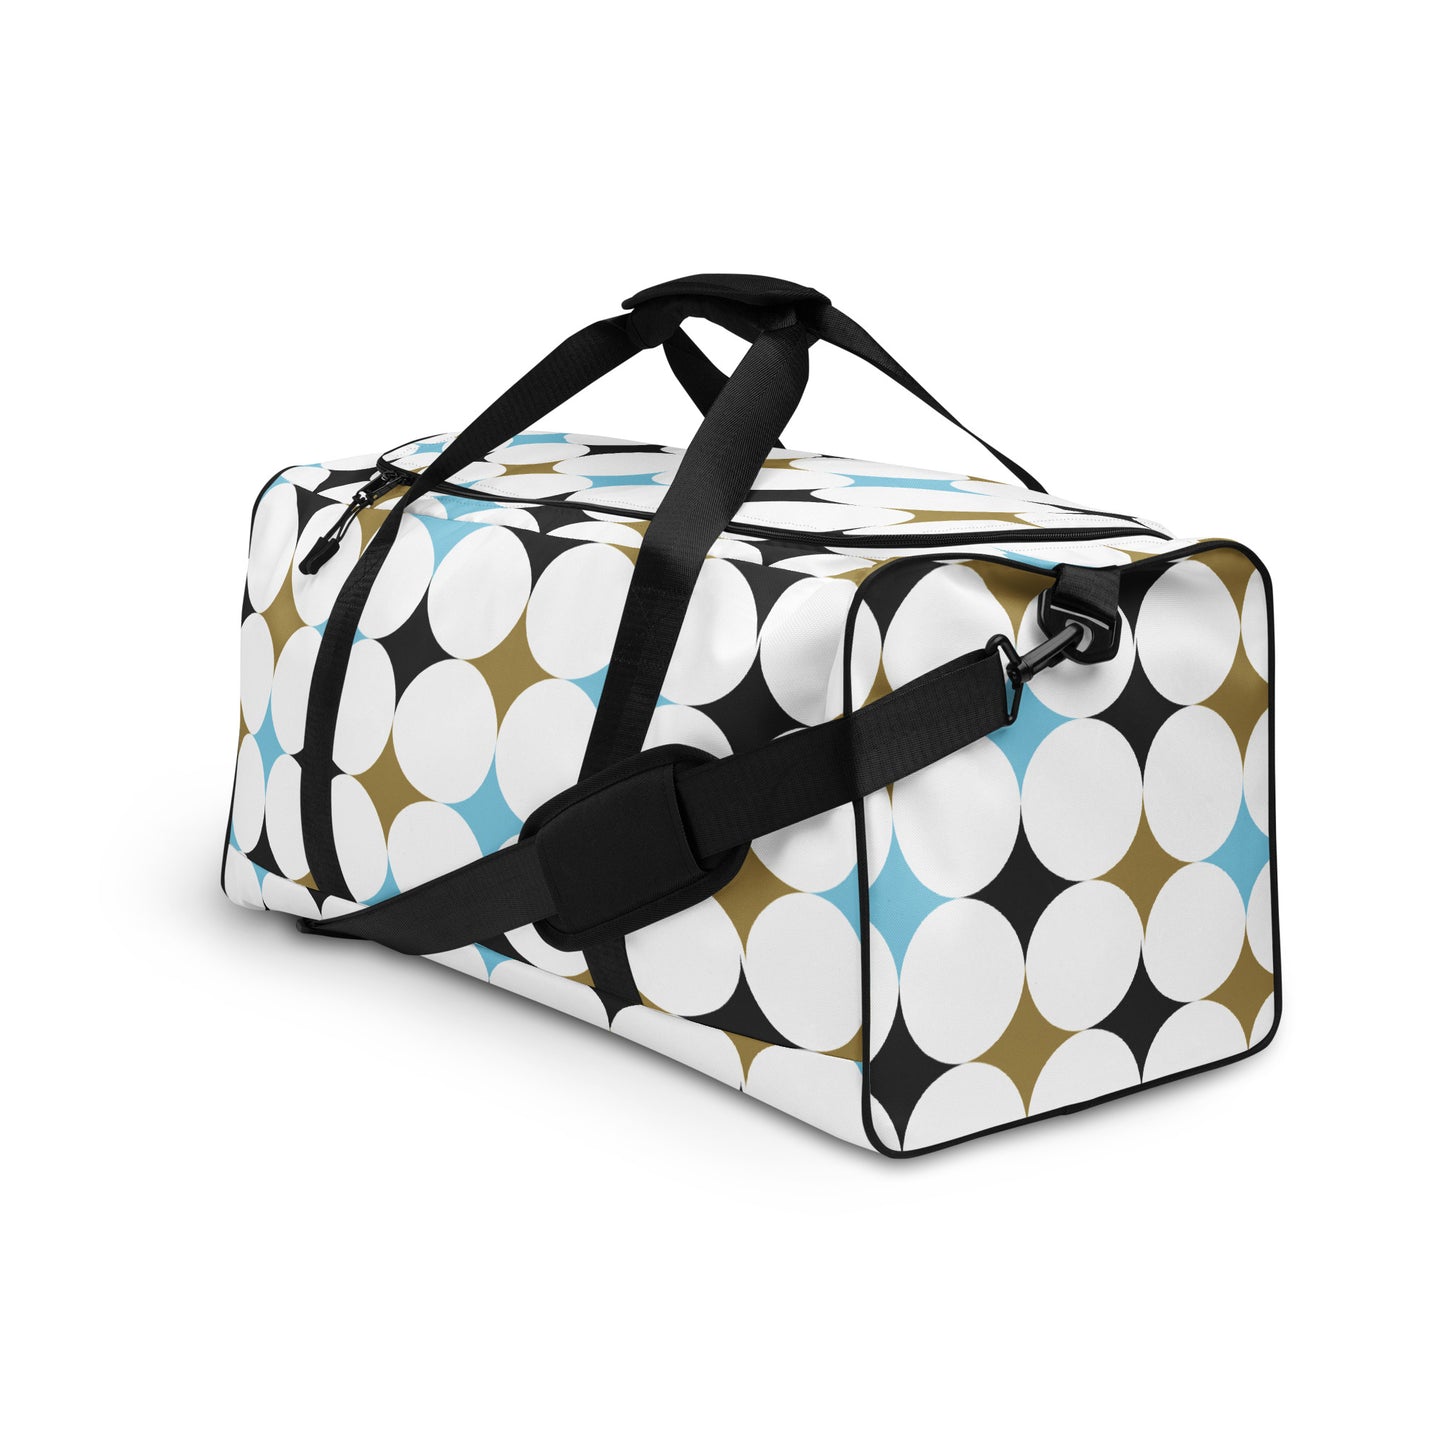 Retro Rounded Pattern - Sustainably Made Duffle Bag